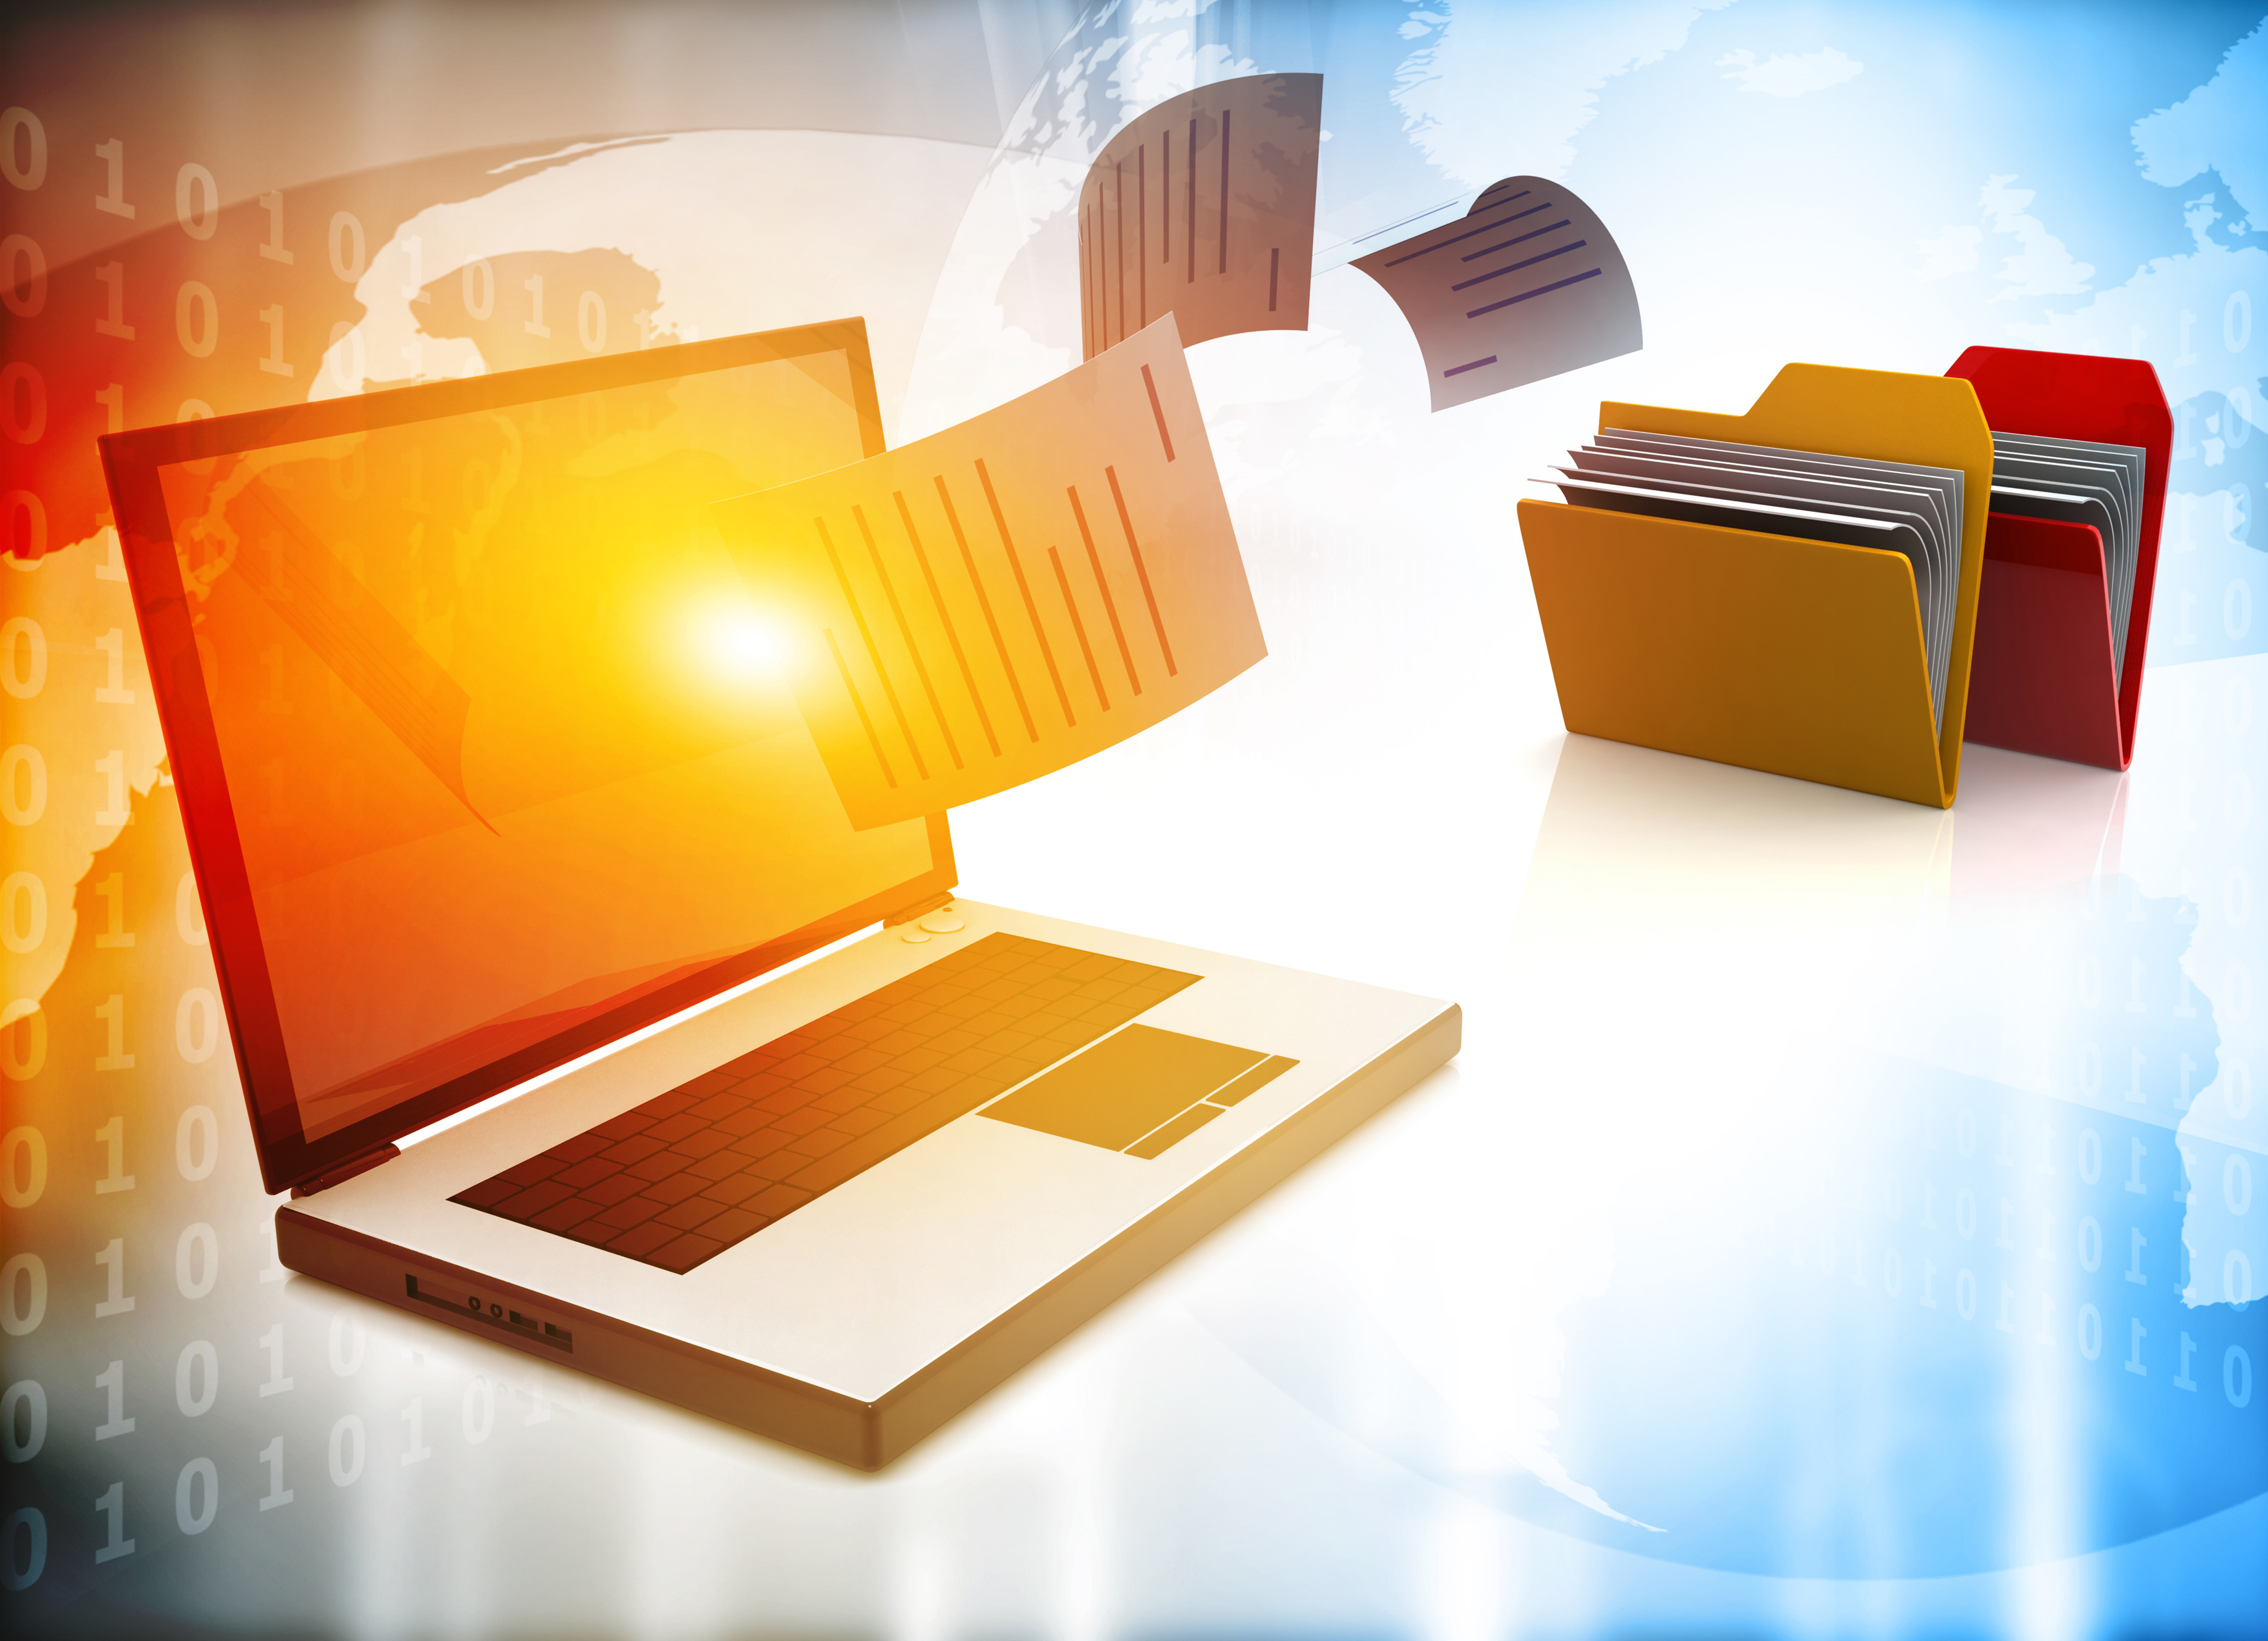 Migrating Your File Server to SharePoint : What to Consider Before Making the Move